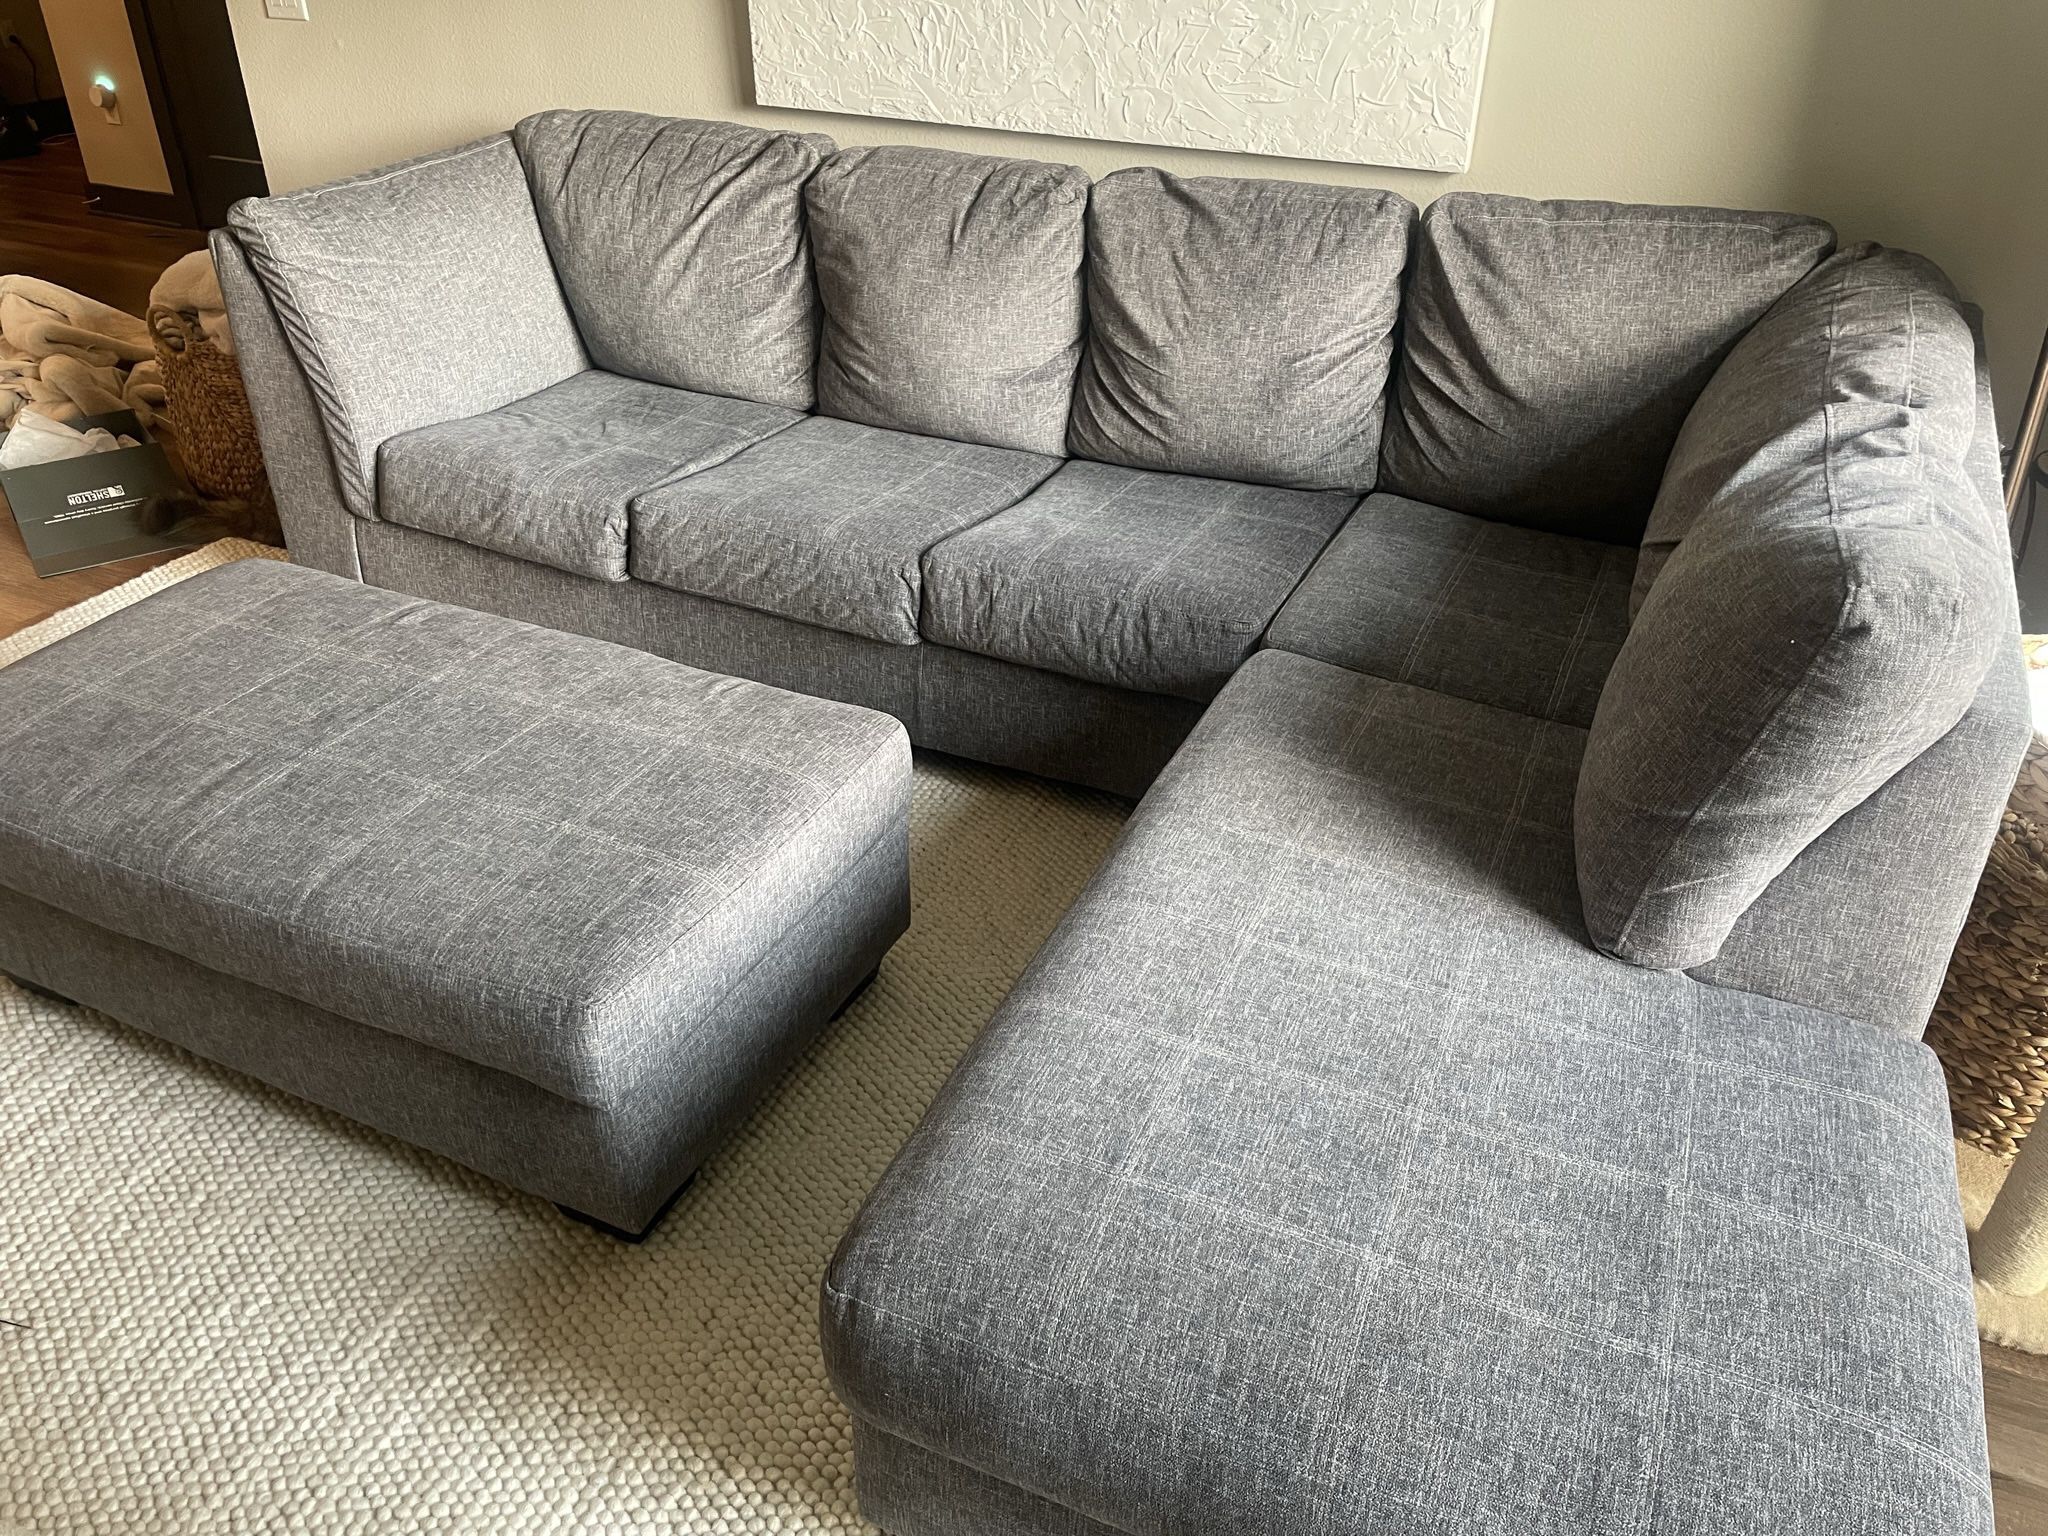 2 Piece Sectional Couch And Ottoman 